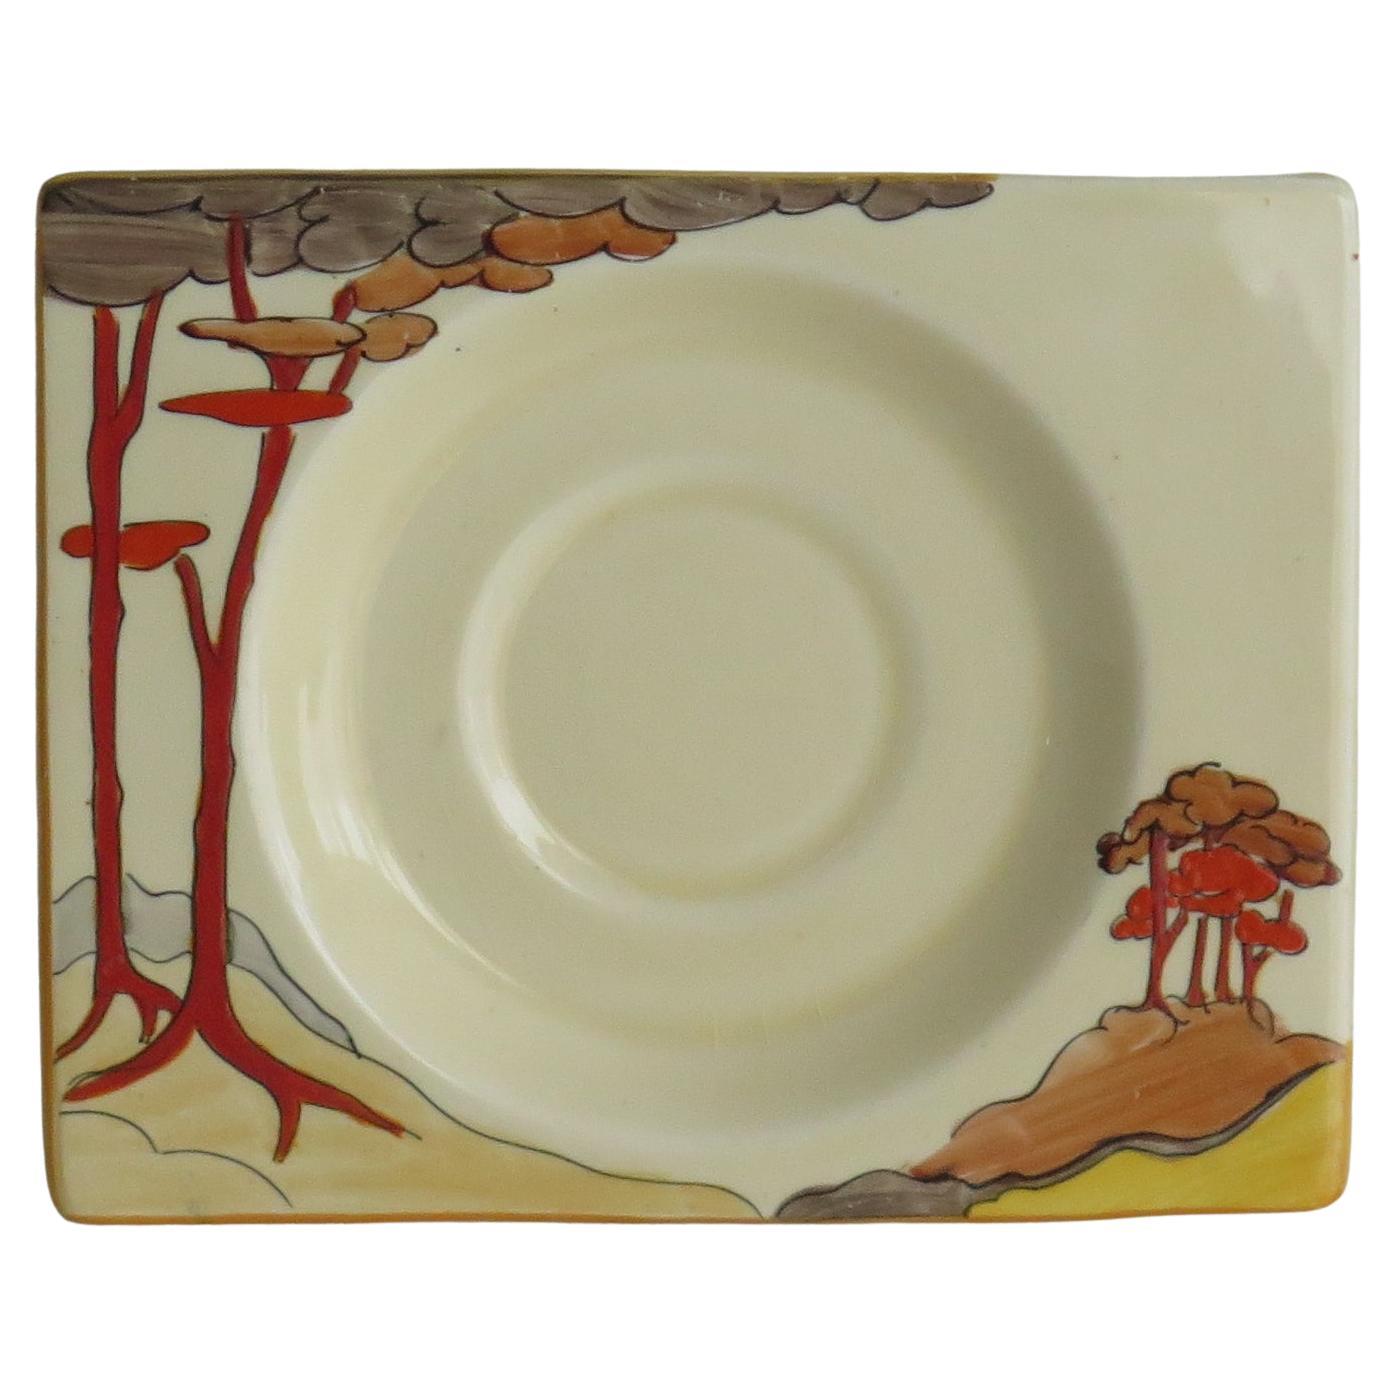 Clarice Cliff Saucer Dish in Coral Firs Pattern Biarritz Shape, Circa 1935